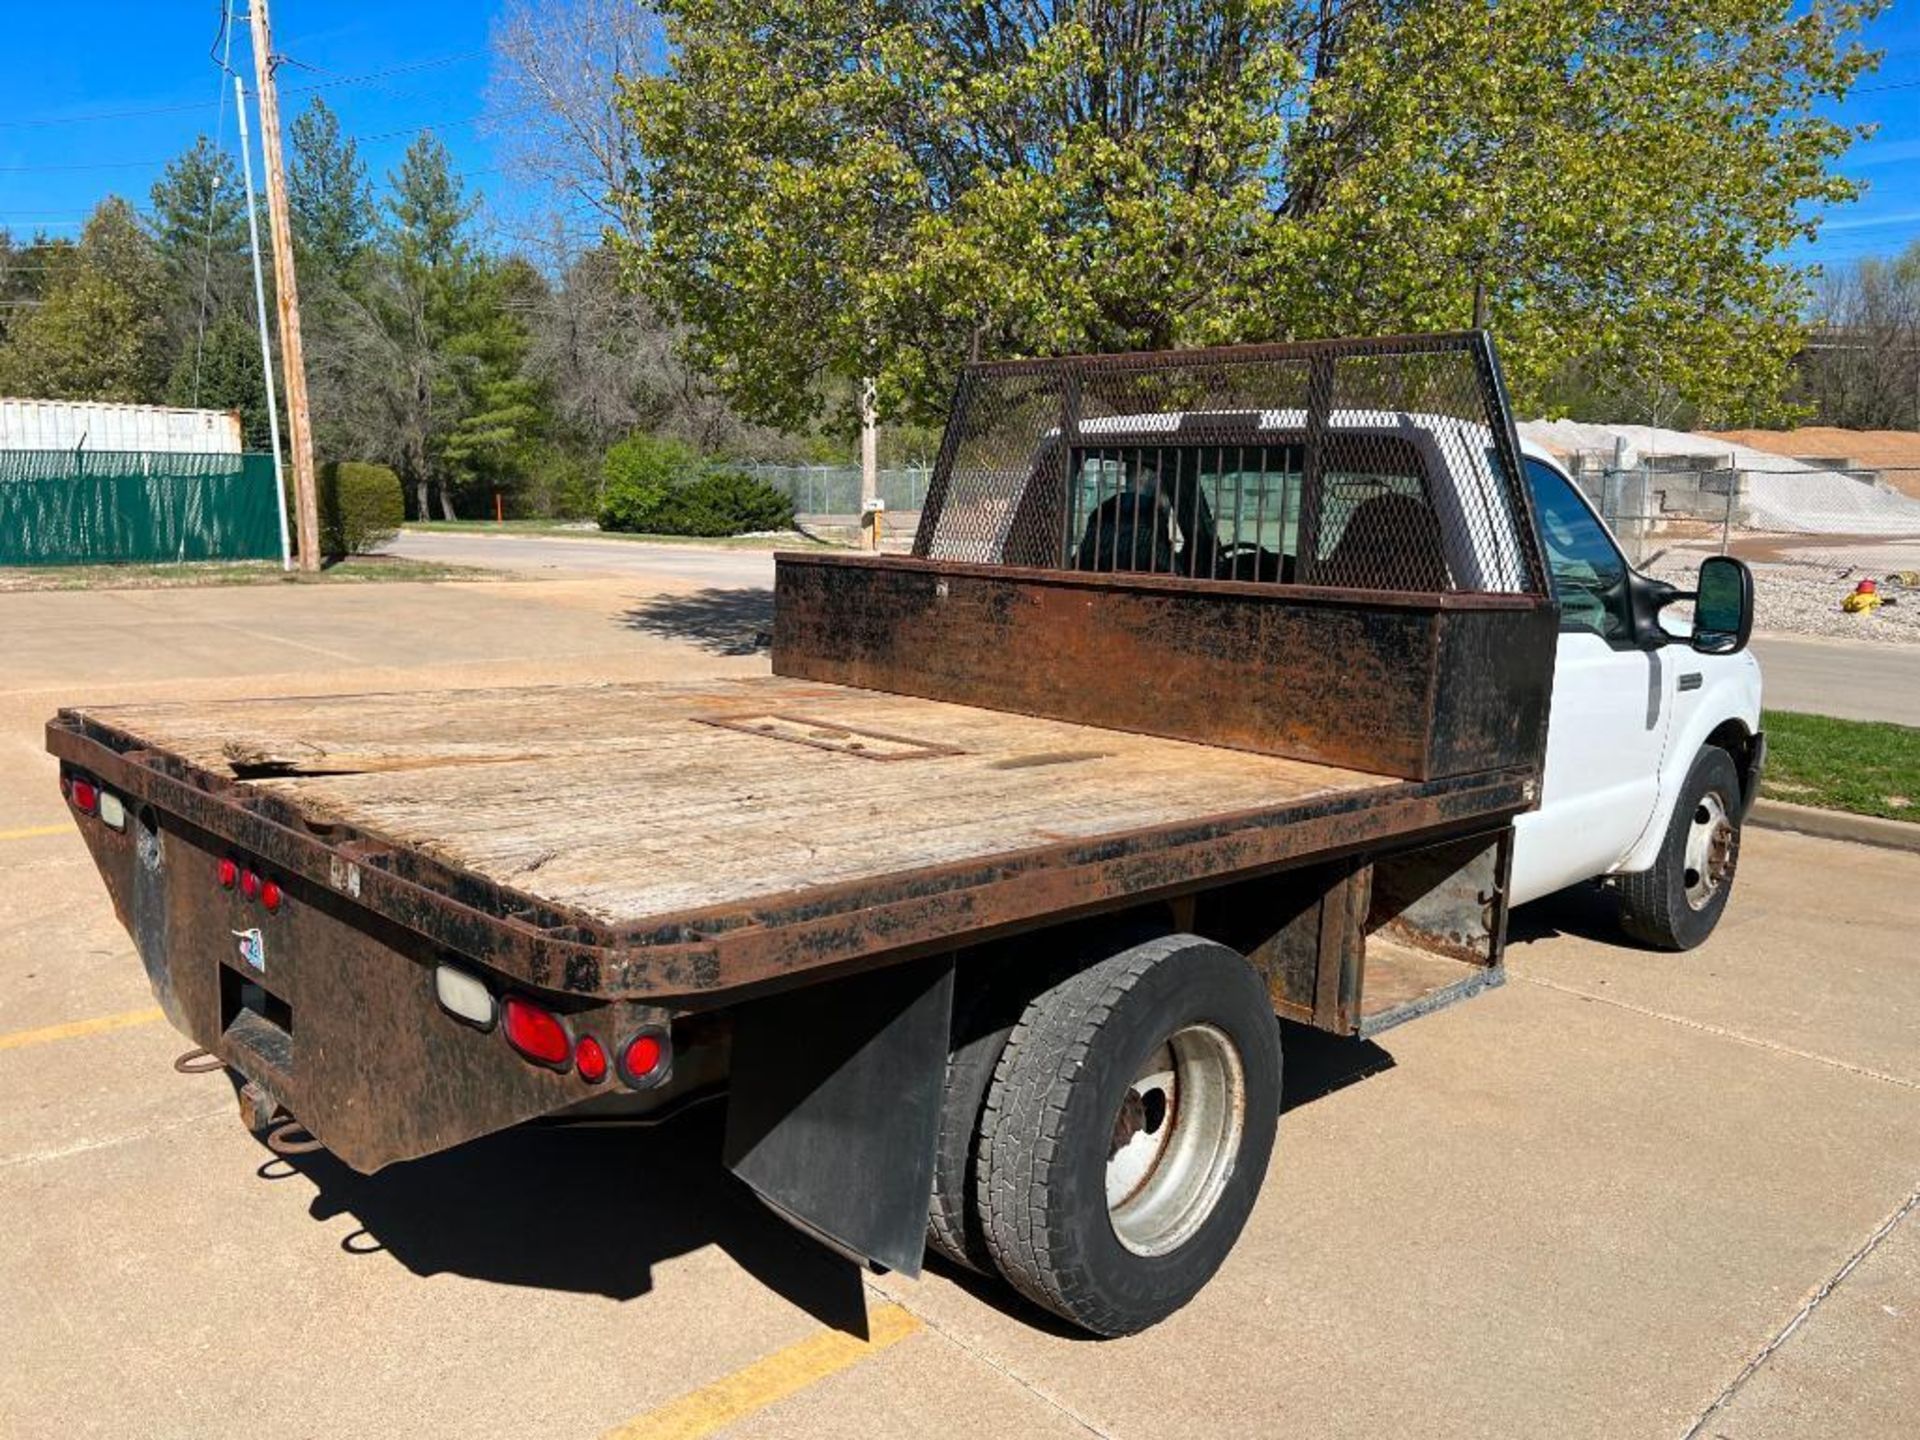 2005 Ford F-350 XL Super Duty Flat Bed Dually Pick up Truck, VIN #1FDWF36P55EA47254, Miles 377,413, - Image 4 of 23